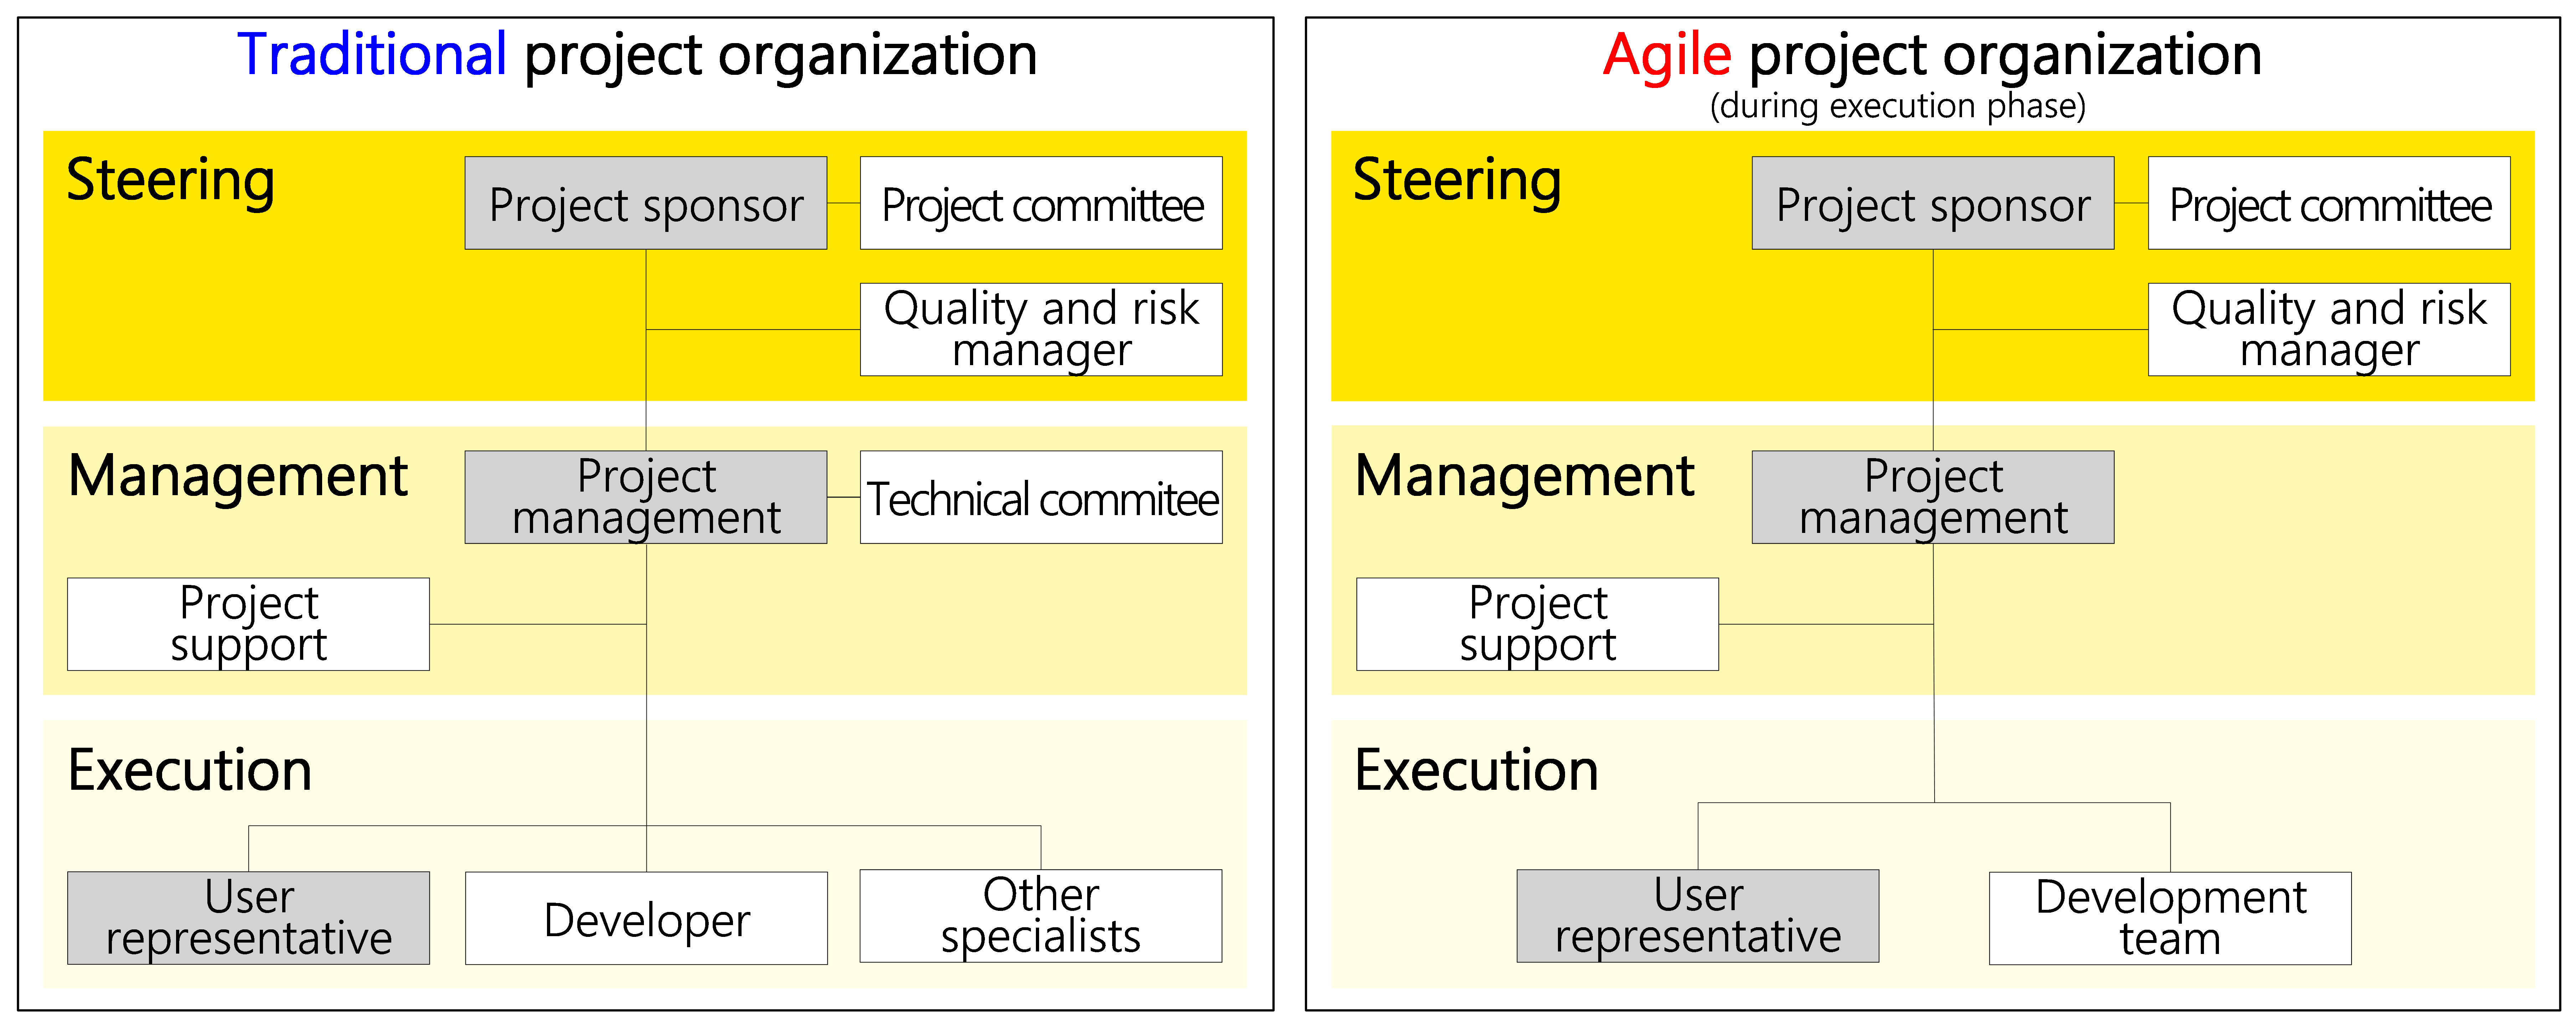 Figure 27: Role assignment to hierarchy levels of a traditional or agile project organization